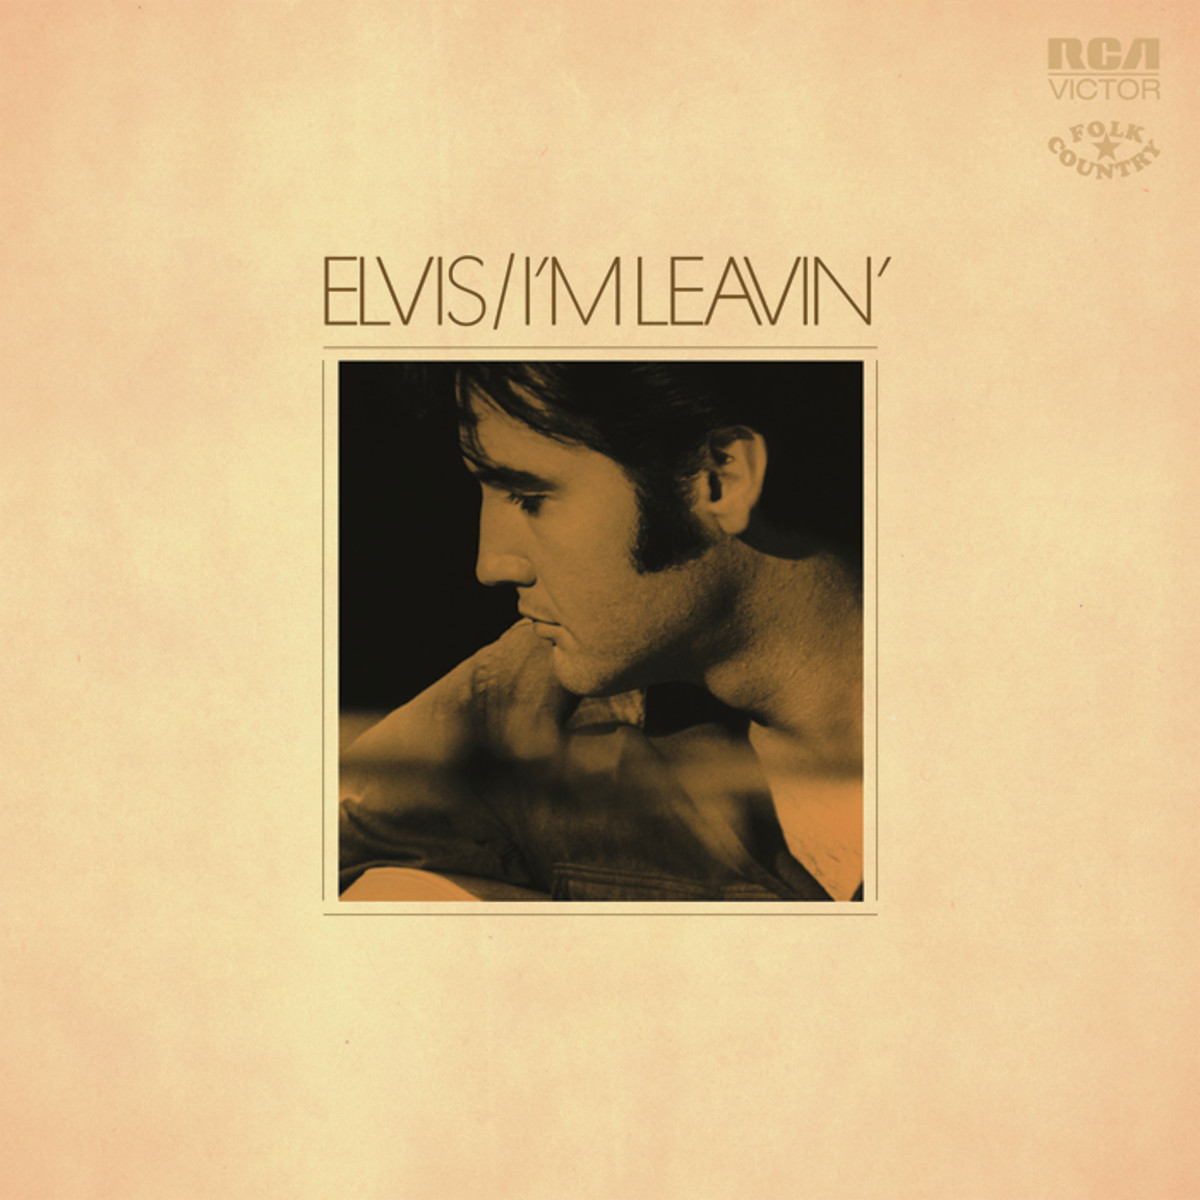  Elvis Presley - “I’m Leavin’” (RCA Victor, Folk-Country) The very best of Elvis Folk-Country 1966-1973. This LP includes masters from Elvis’ sessions at RCA Victor’s Studio B in Nashville in May 1971. This was a period in which several folk writers’ material surfaced spontaneously amid gospel and holiday recordings, plus others with similar provenance — from Dylan’s “Tomorrow Is A Long Time” in 1966, to then-contemporary pop-folk such as “Good Time Charlie’s Got The Blues” in 1973. This RSD release is Elvis in an introspective mood, masterfully creating definitive versions of iconic compositions that resonated with him for his friends in the studio — and for fans of Record Store Day.